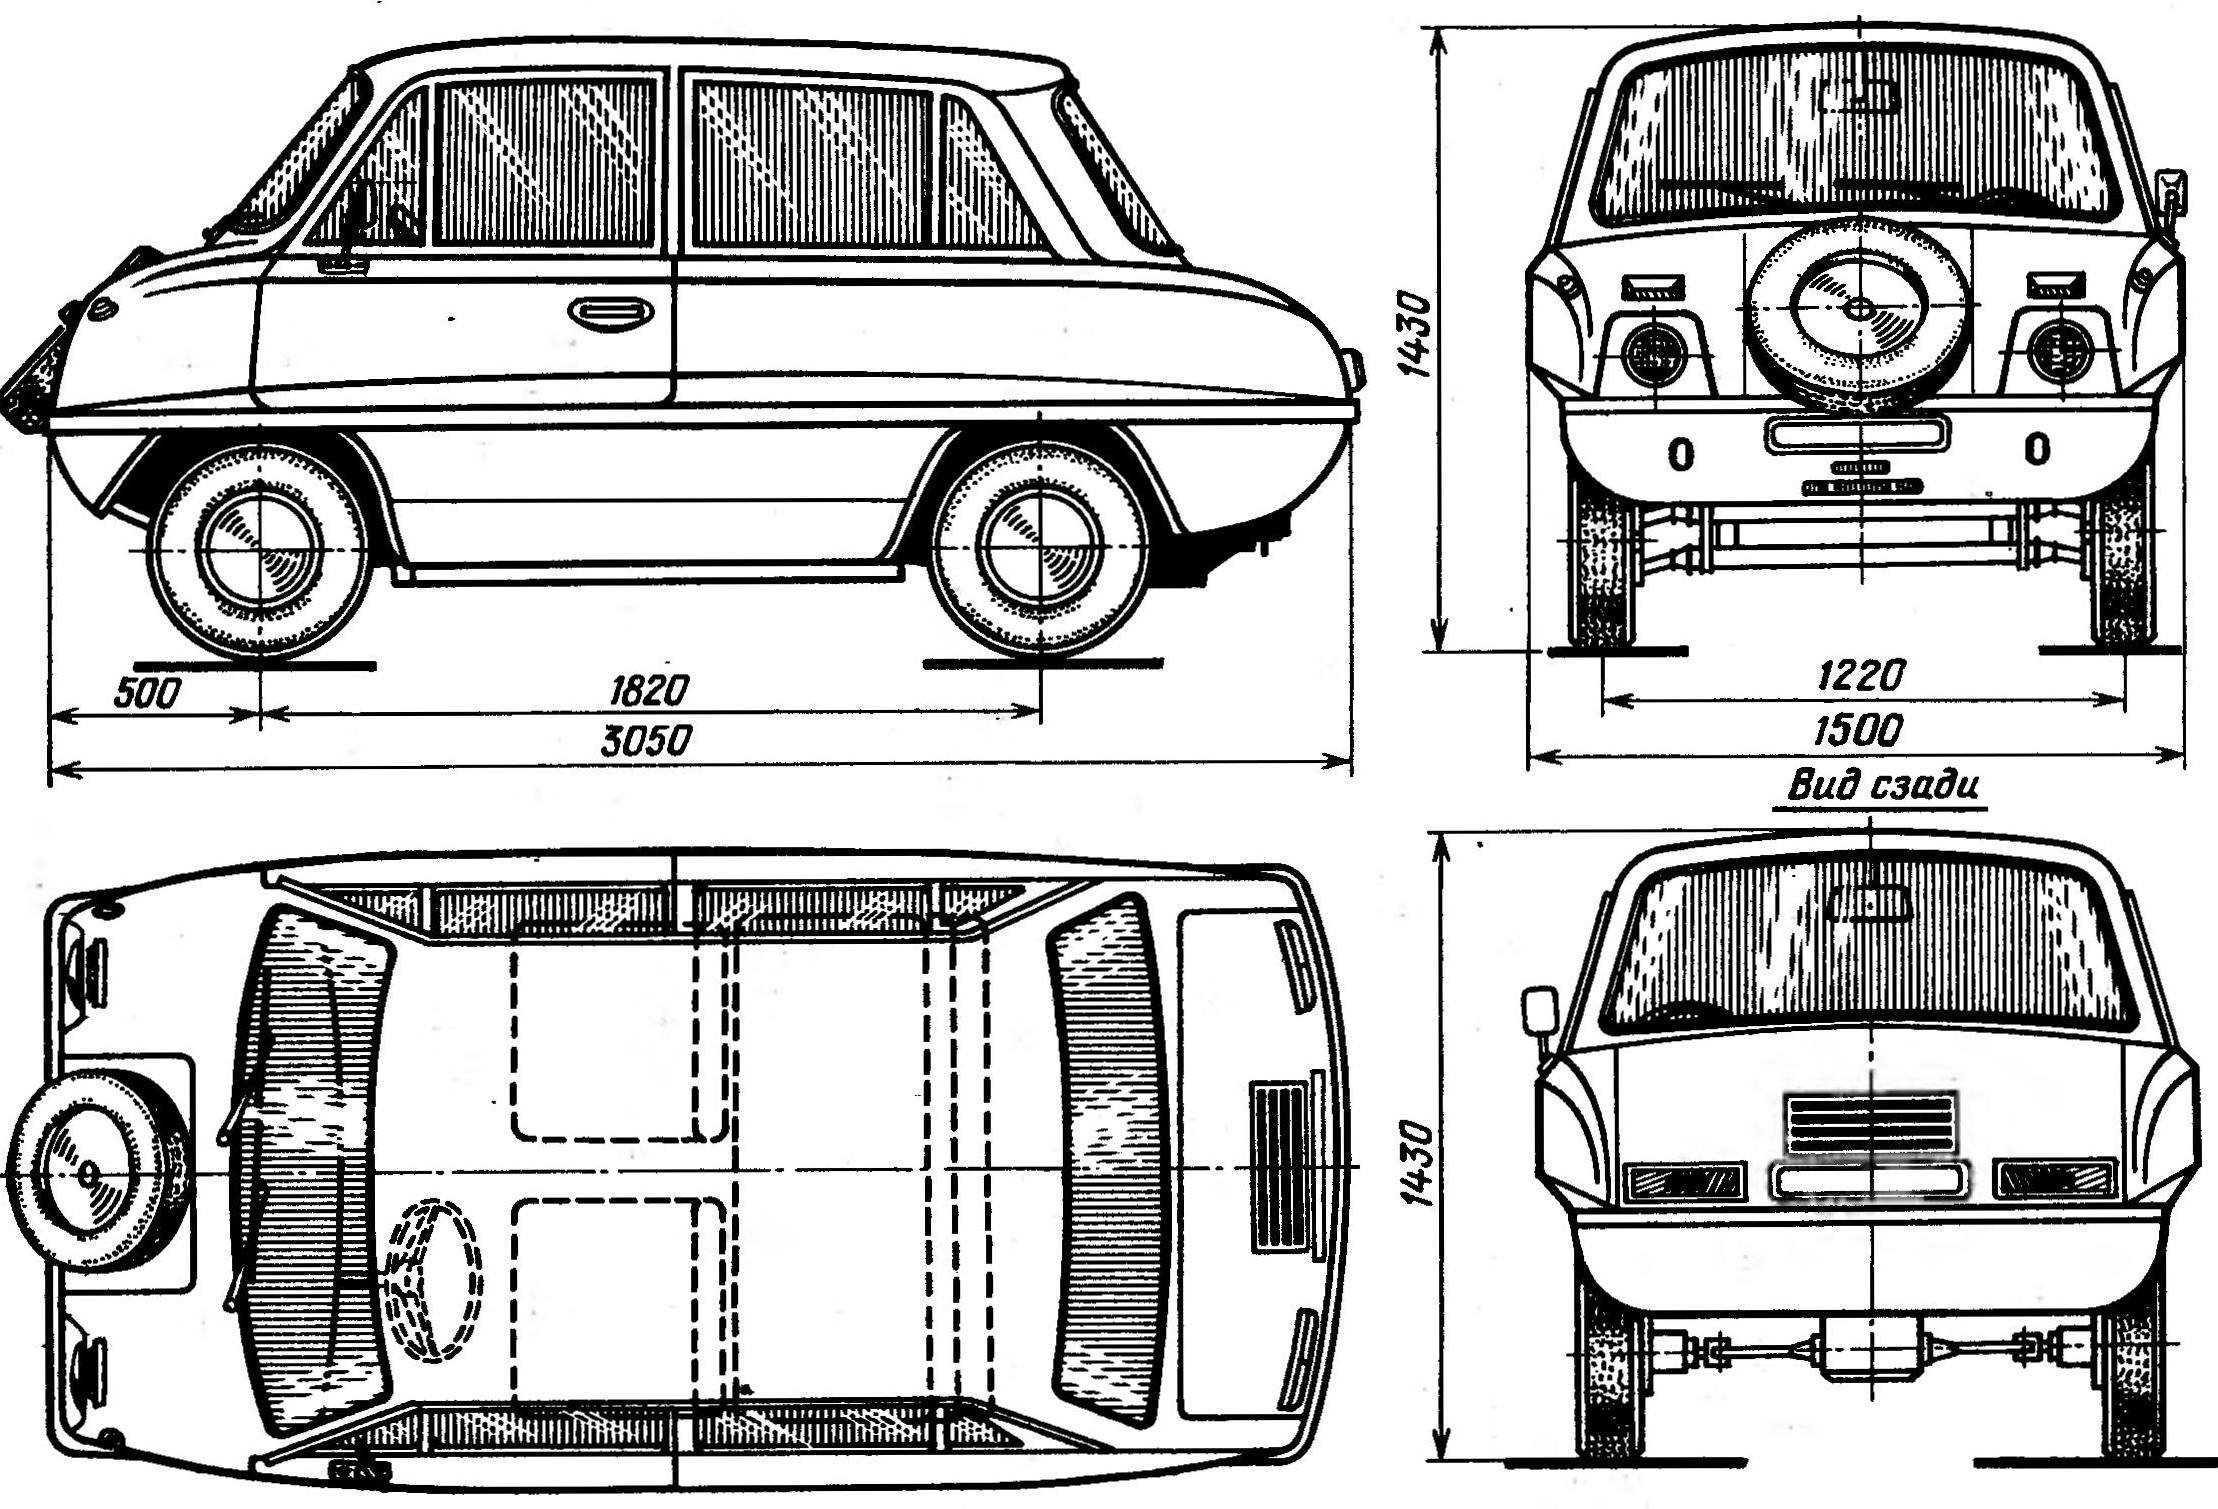 Fig.2. The layout of the car 